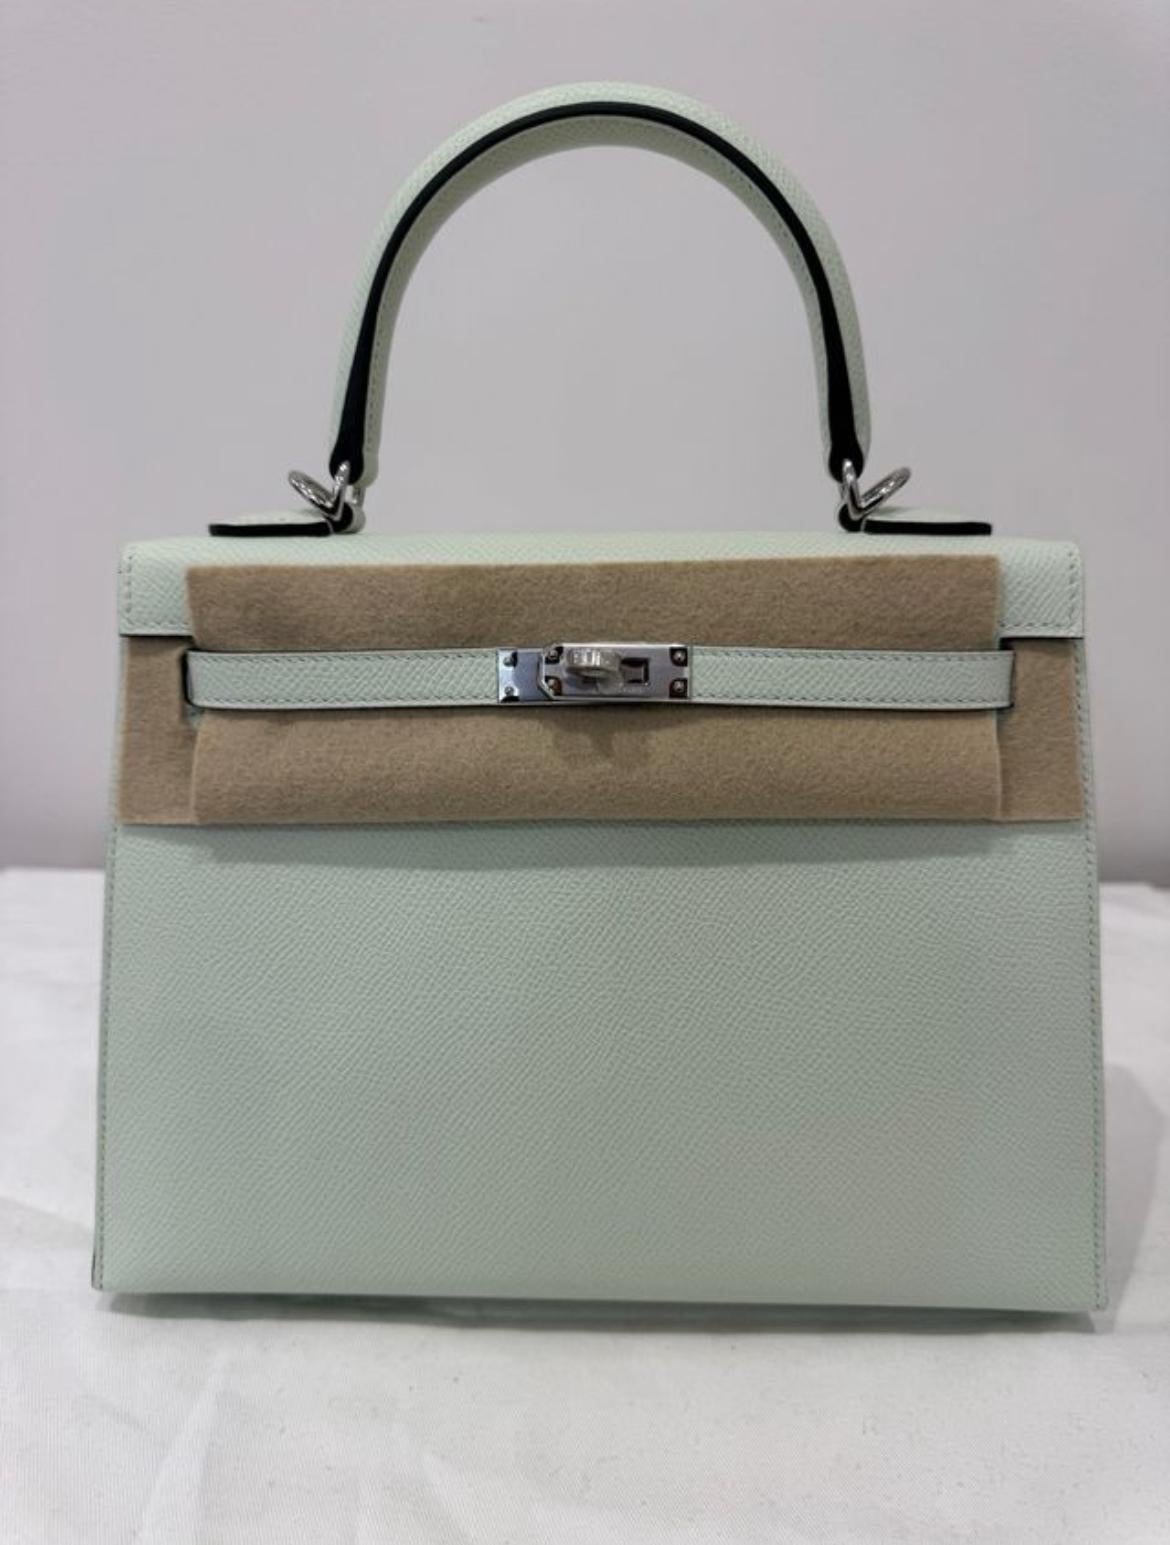 Hermes New Hermes Kelly 25 Epson Vert Frizz  Epsom Palladium Hardware 
2022. With box and papers
Excellent Condition. A Collectors Piece
Measurements : 22cm High x 25cm Wide x 10cm Deep
The Kelly bag came to success when it was first paparazzied on